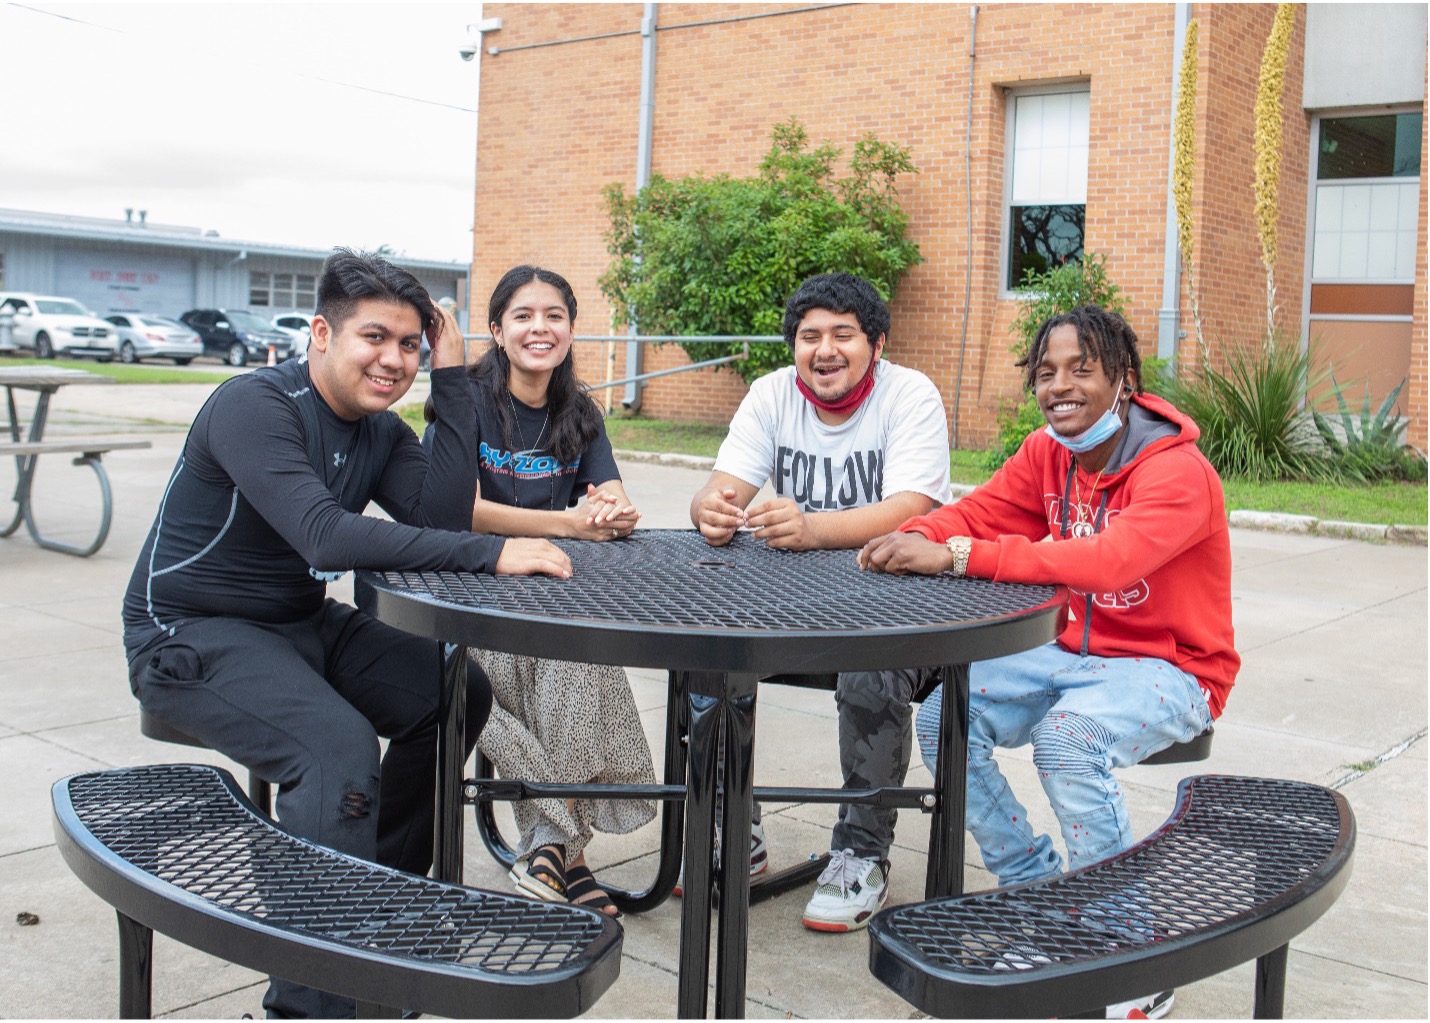 Students sitting around an outdoor table.